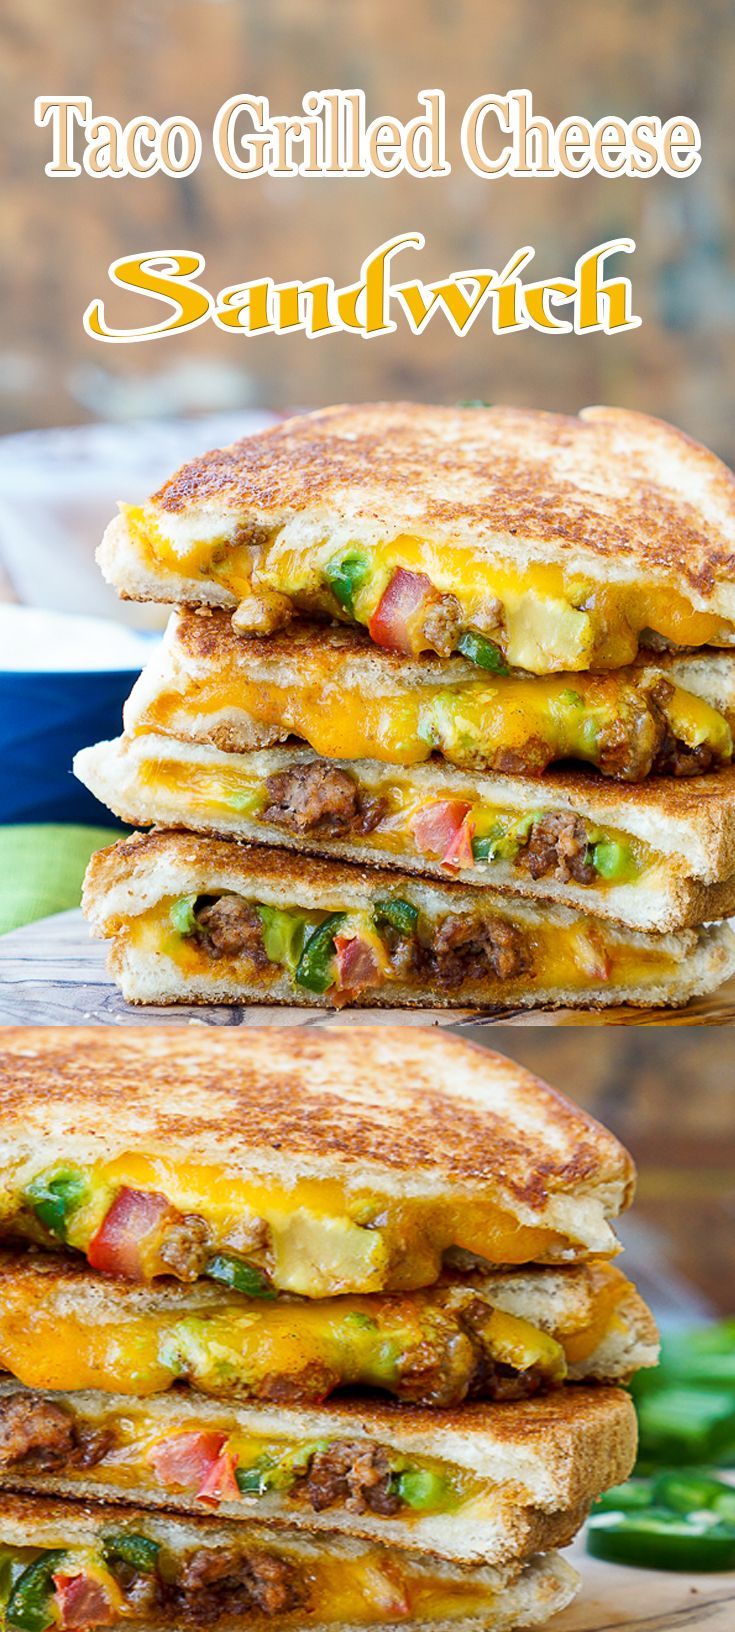 Taco Grilled Cheese… delicious as is but eve better dipped in one of SBRs many dipping sauces.